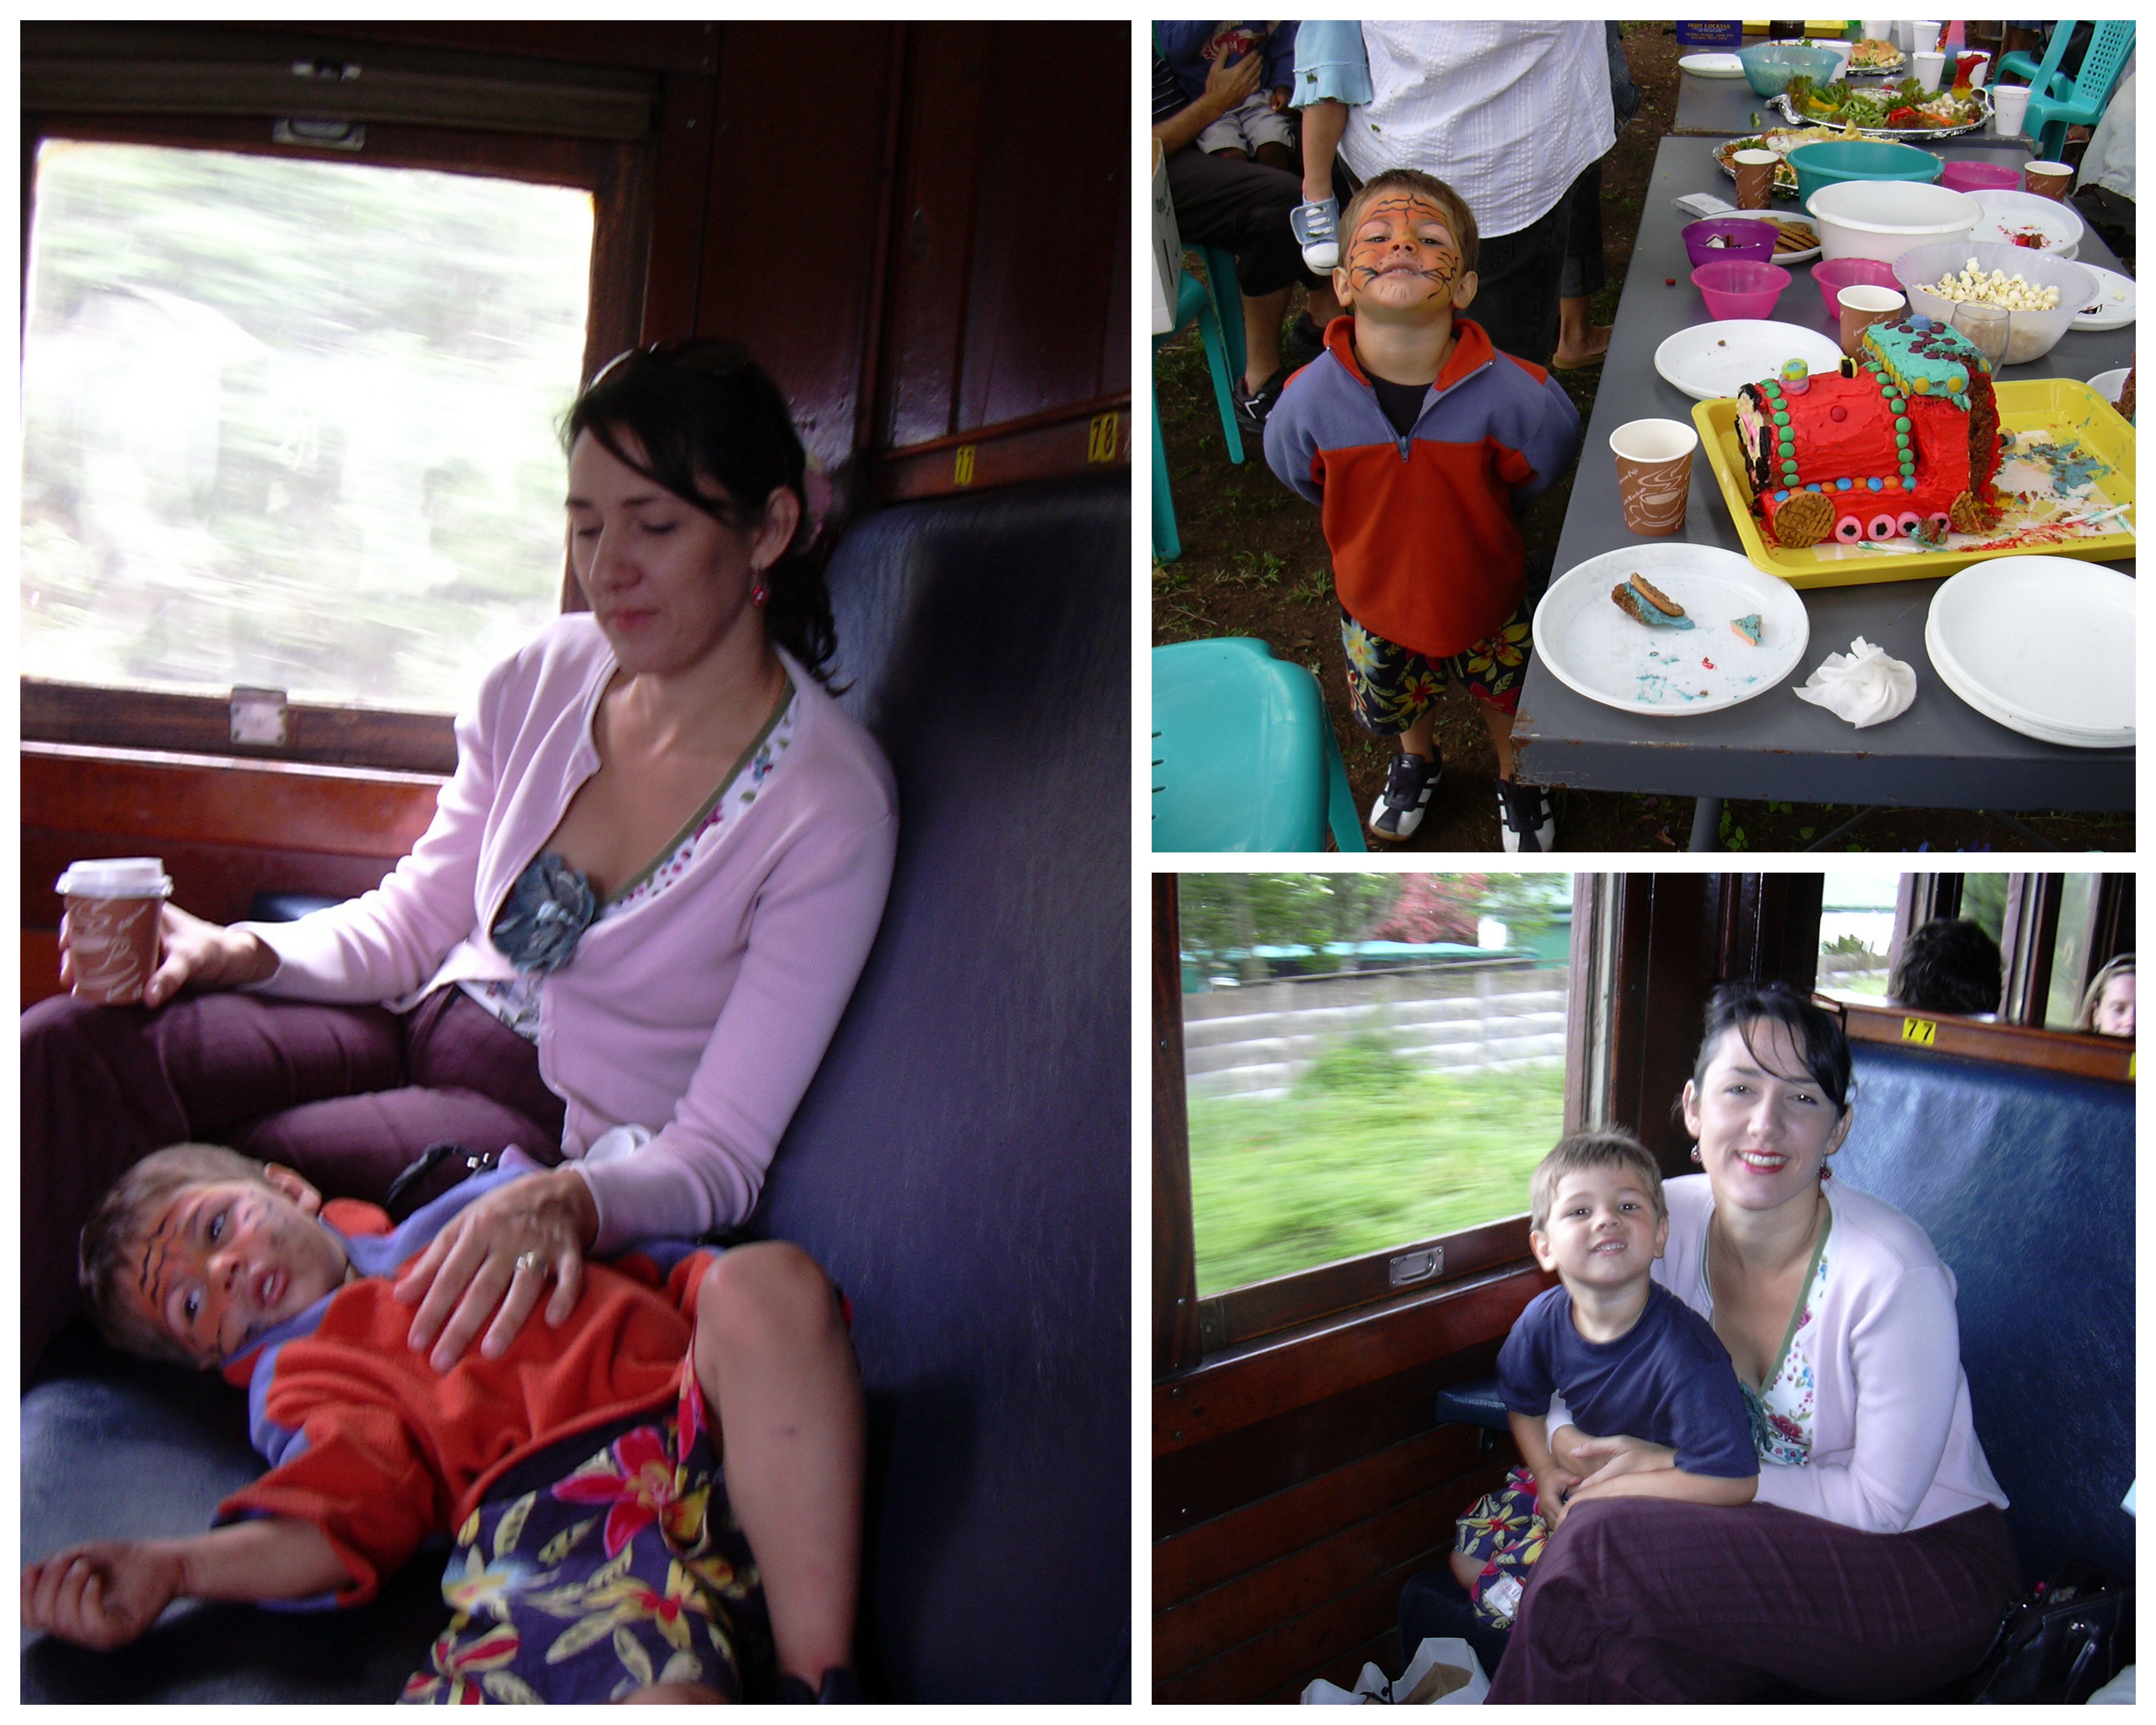 Luke flew out of the window! Inchamga Steam Train collage